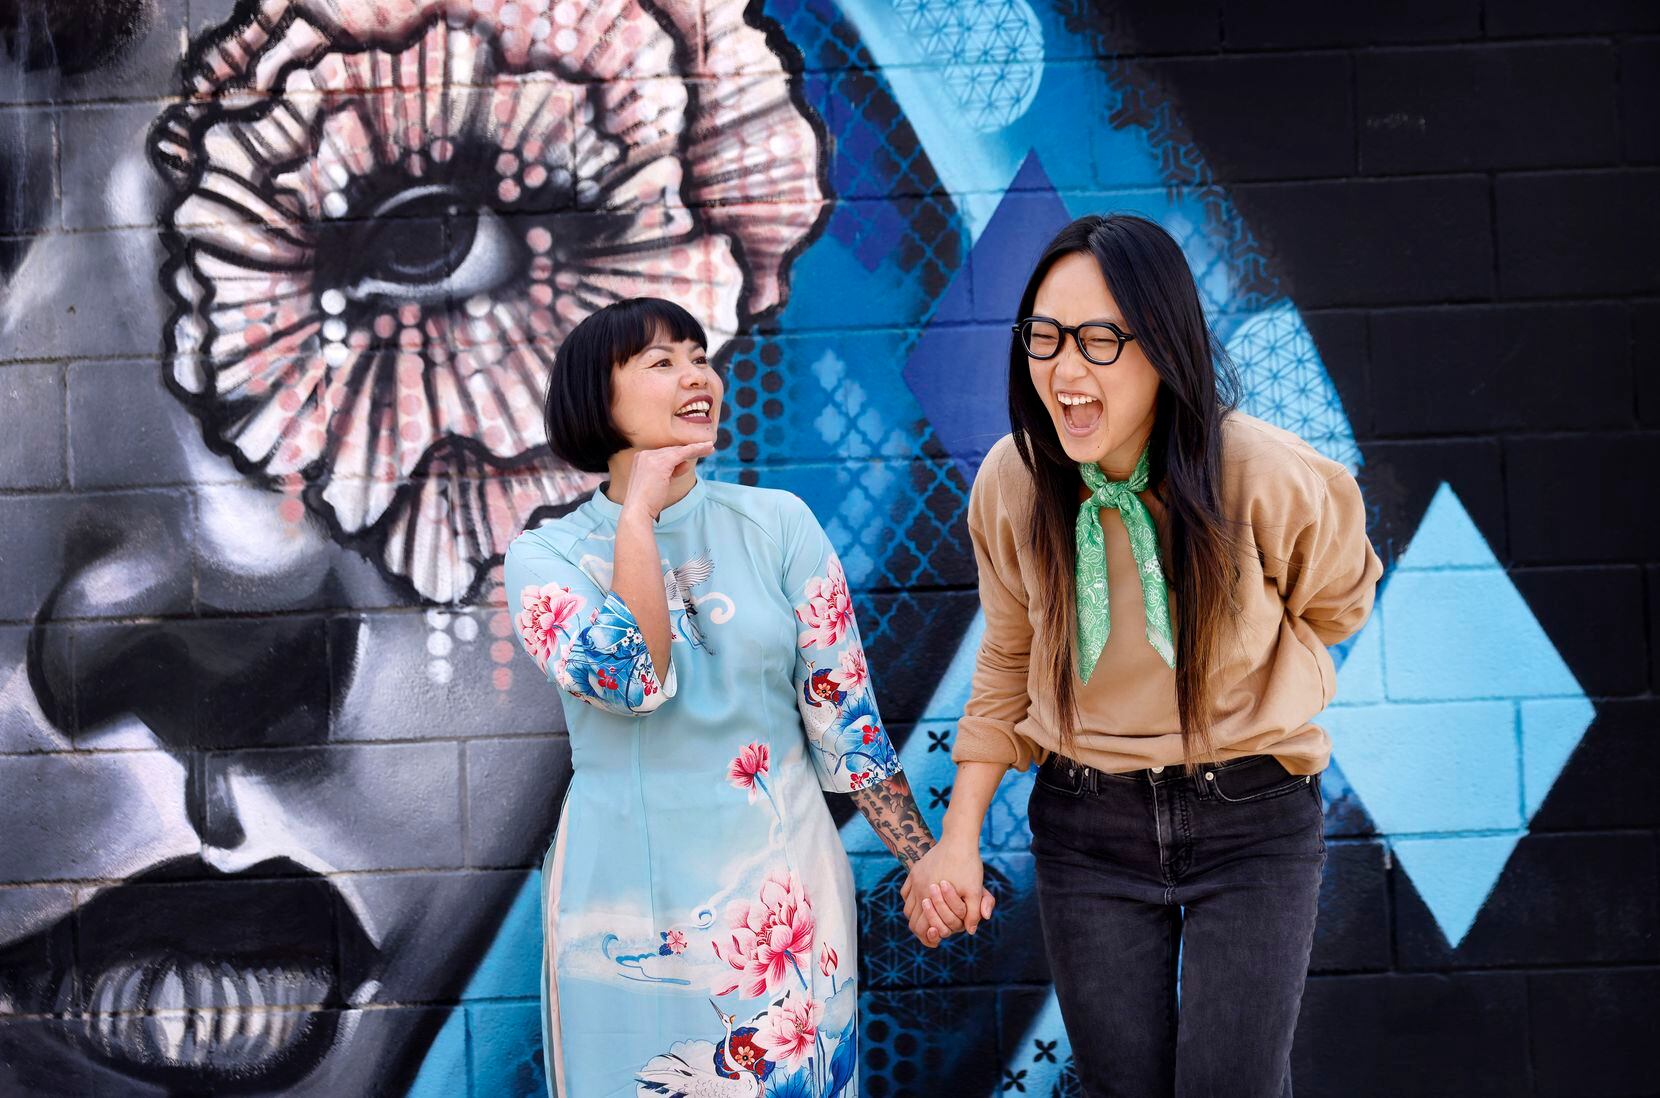 Chef Reye Duong of Sandwich Hag (left) and chef Jinny Cho of Detour Doughnuts in Frisco are...